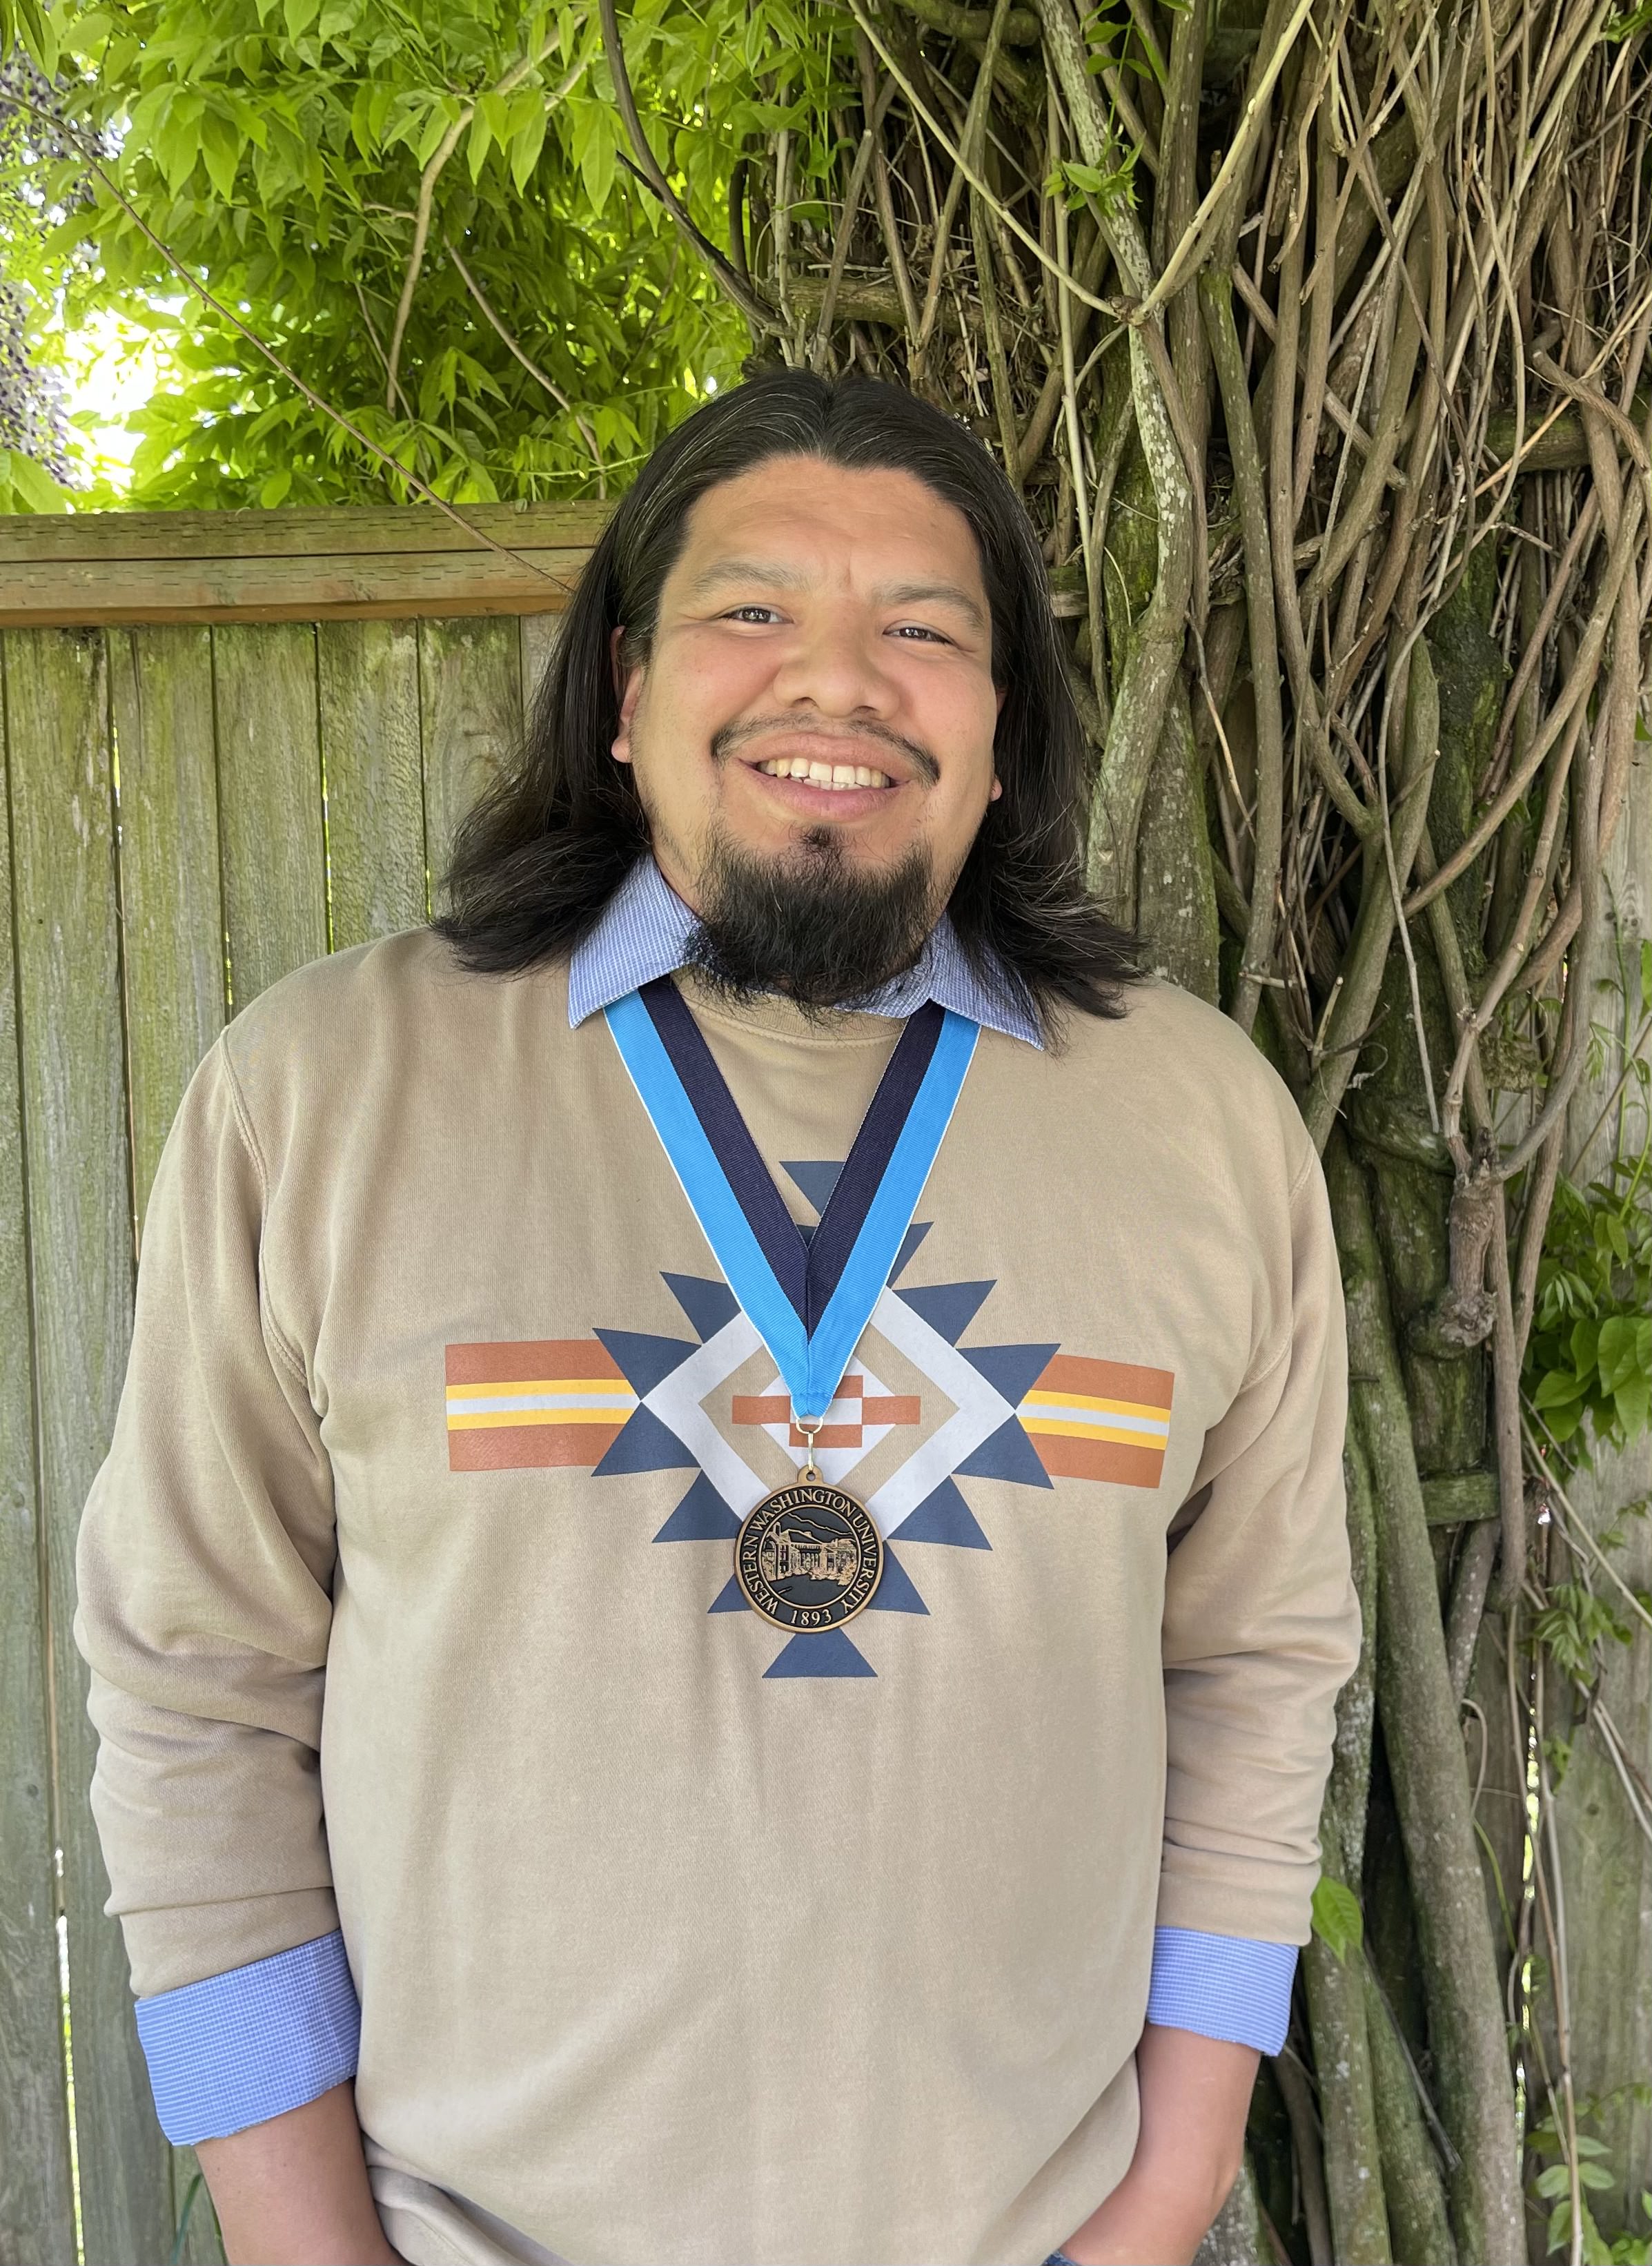 Brandon Joseph smiling broadly wearing a shirt with a colorful native motif and a WWU medallion on a neck ribbon